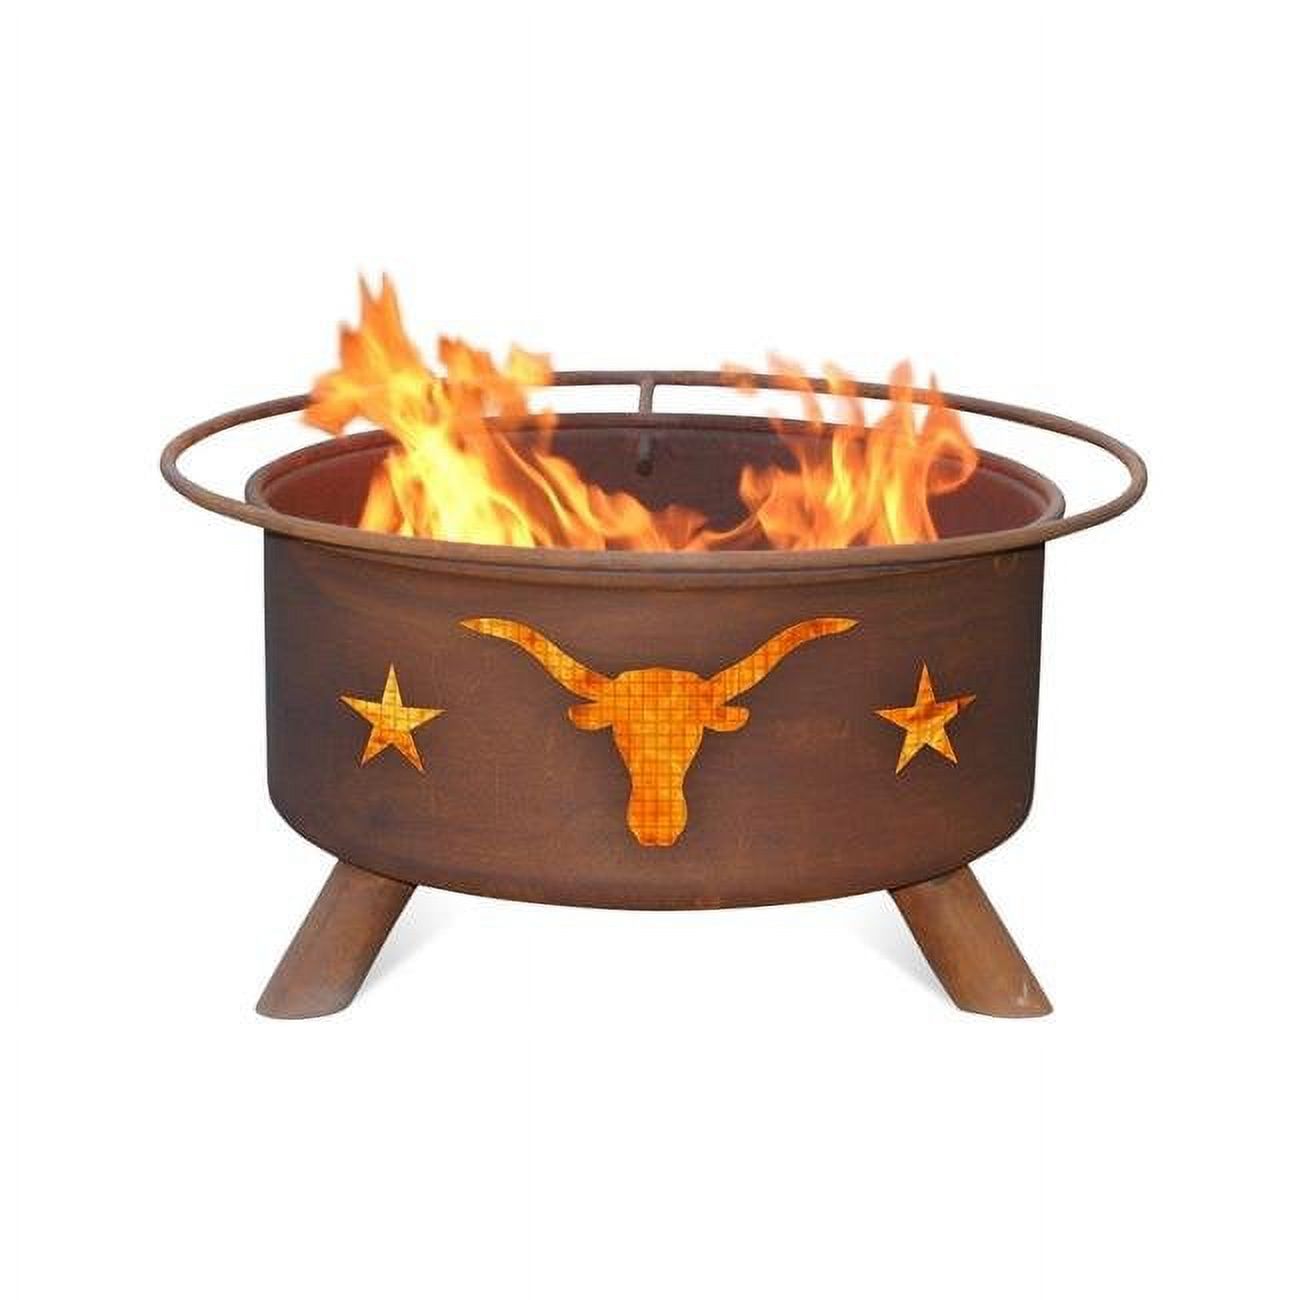 Patina Products F202 Texas Longhorn Fire Pit - image 1 of 2